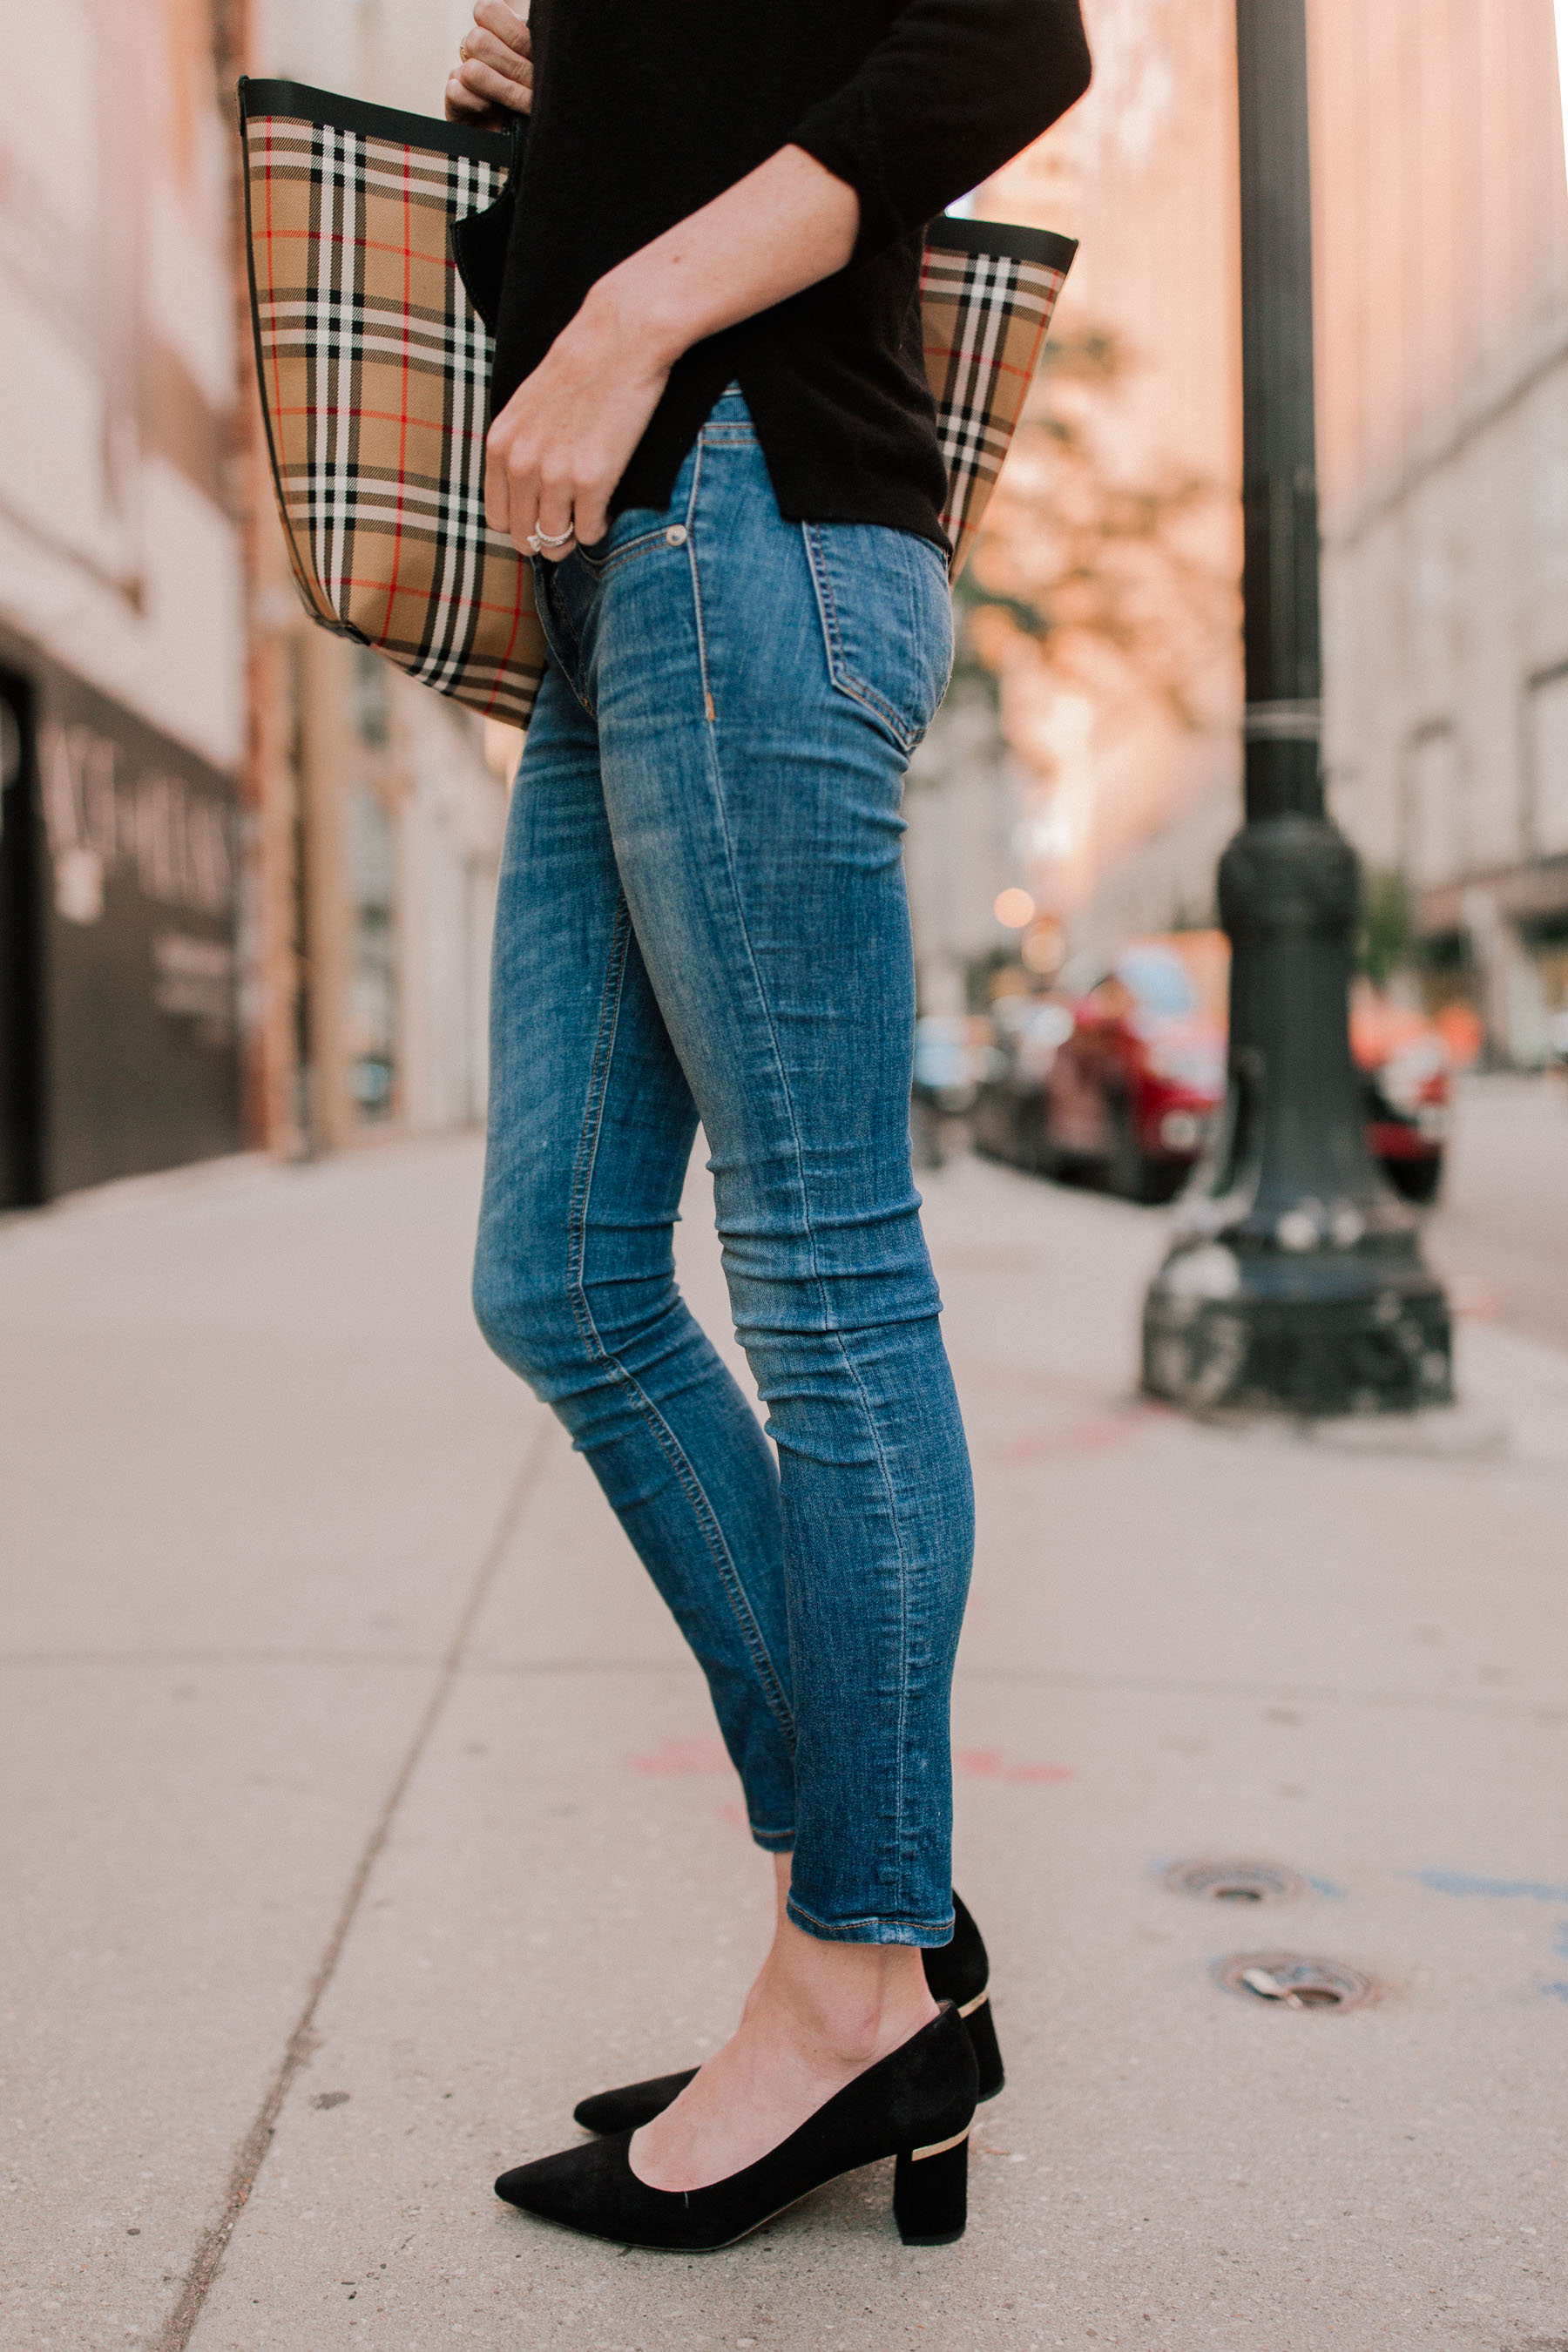 Rag & Bone Jeans / Kate Spade Pumps / Burberry Tote / Black Cashmere Sweater - Kelly in the City